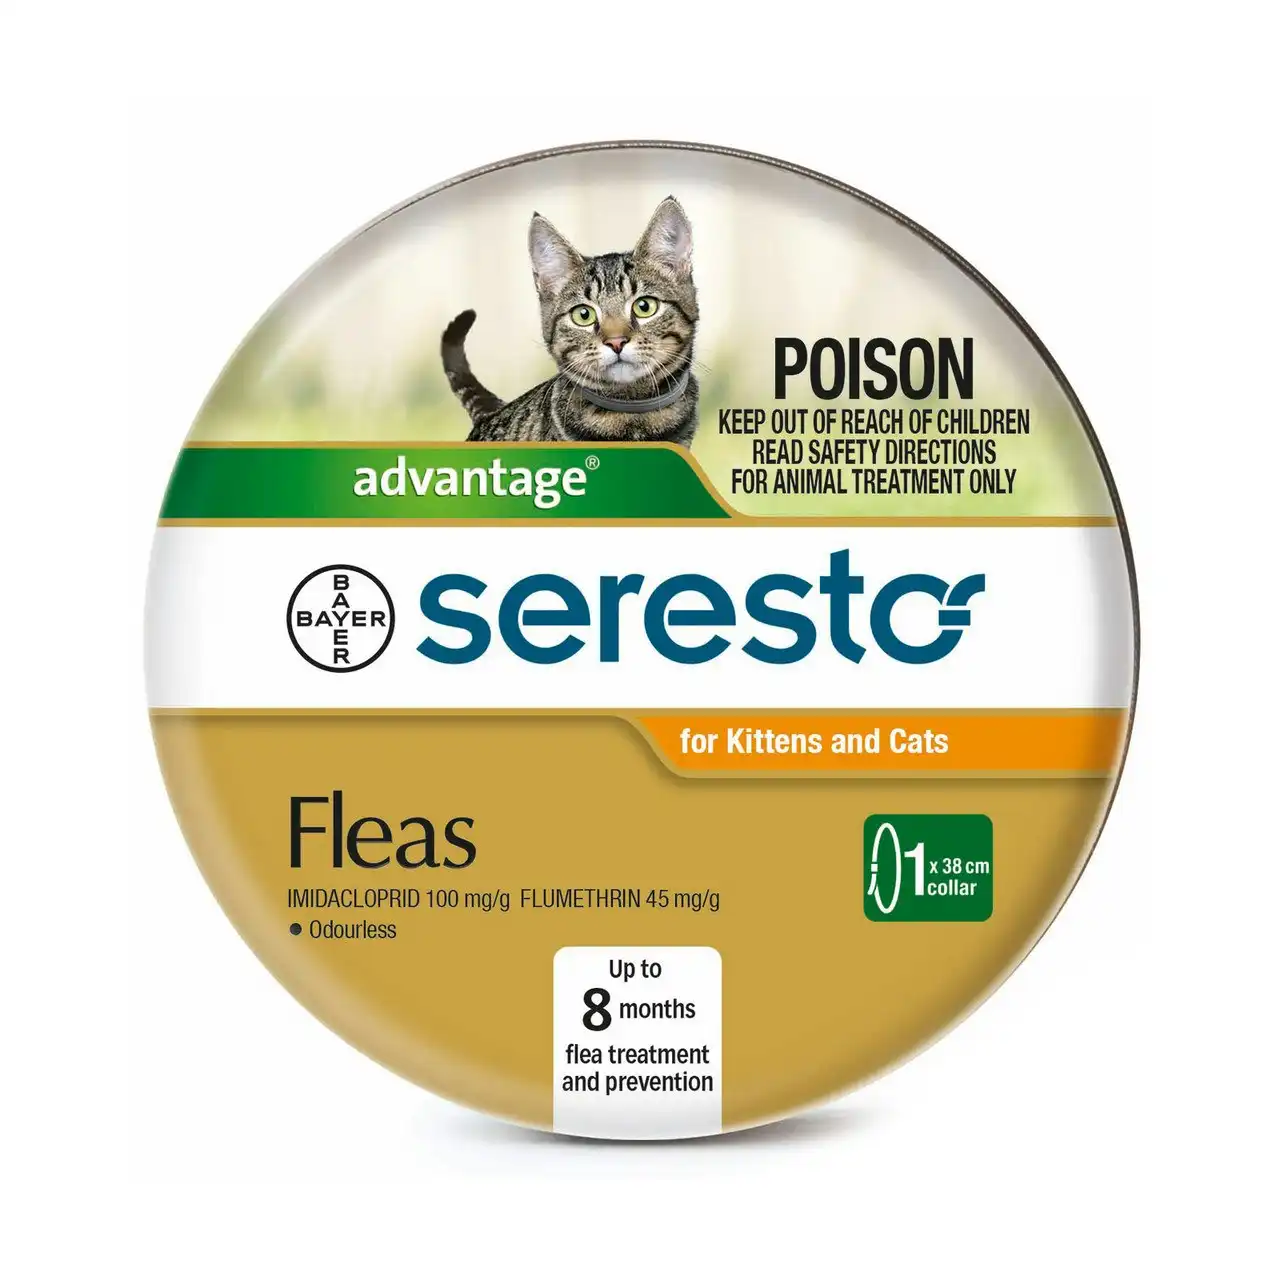 Seresto(TM) Flea & Tick Collar for Kittens And Cats - 1 Pack